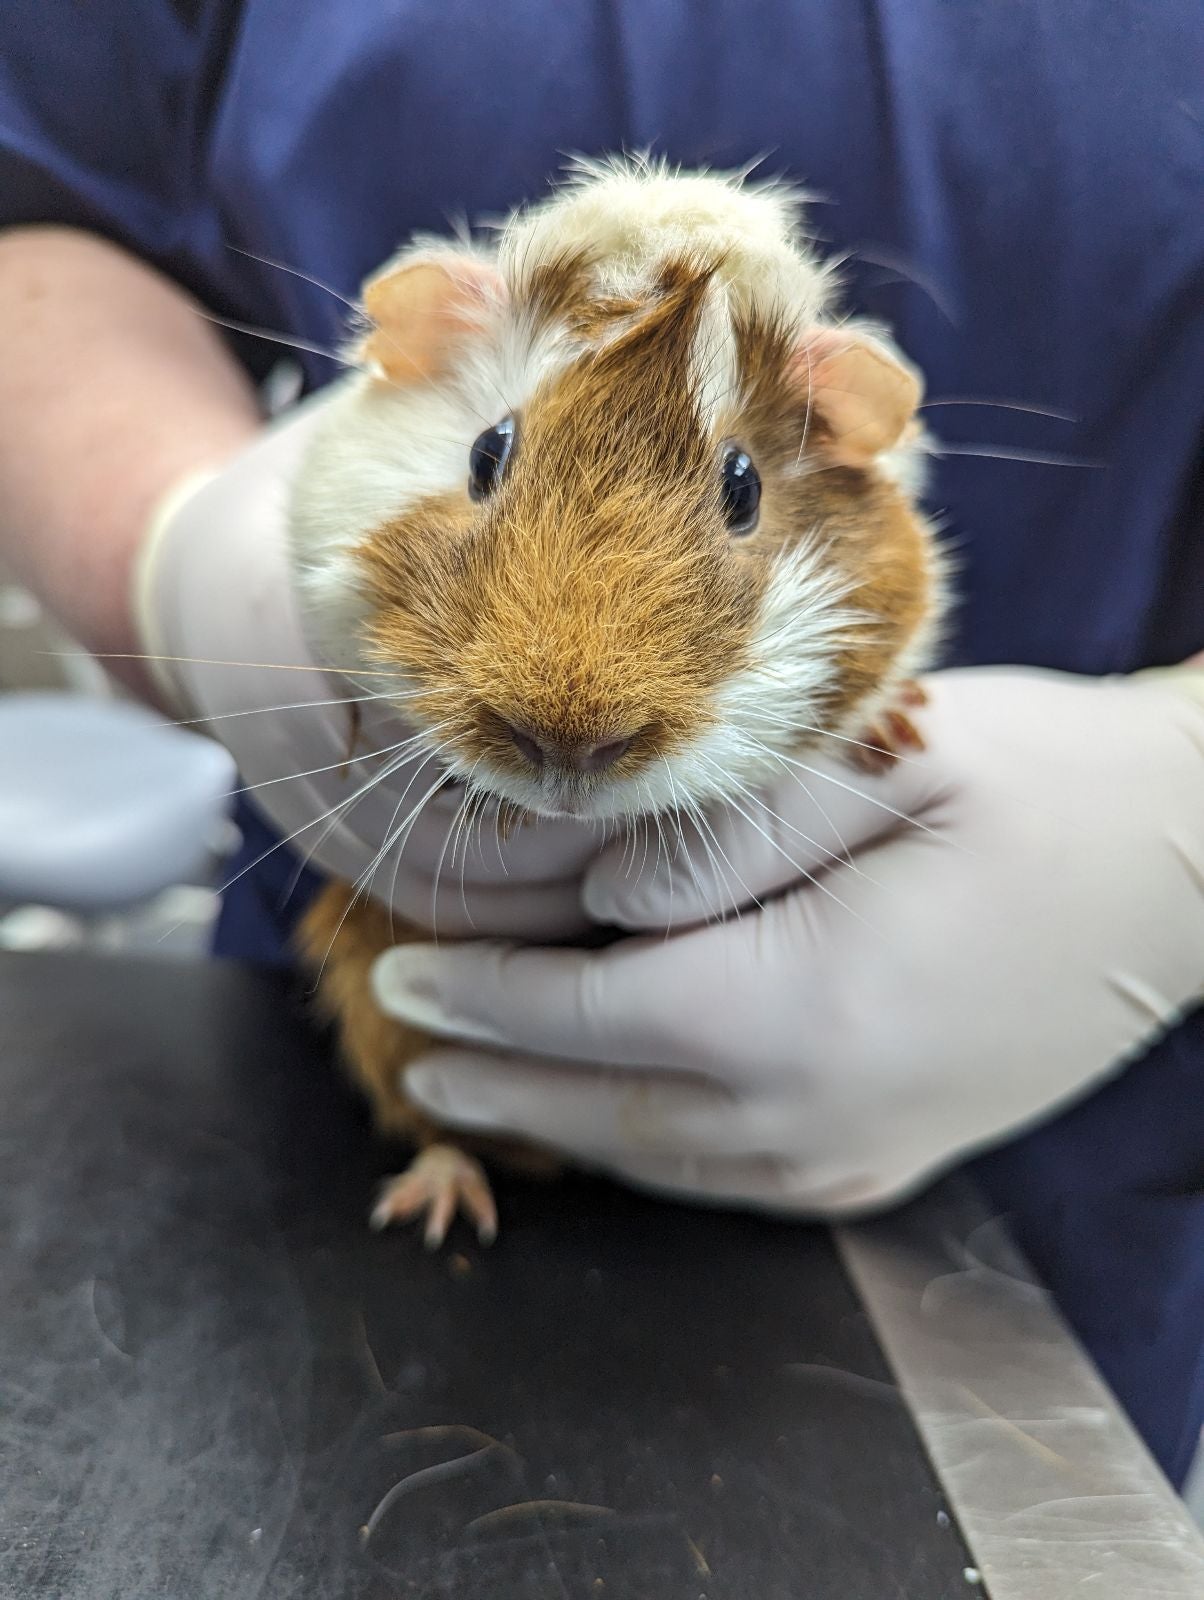 The RSPCA have issued a warning after a guinea pig was abandoned at a London tube station with a note